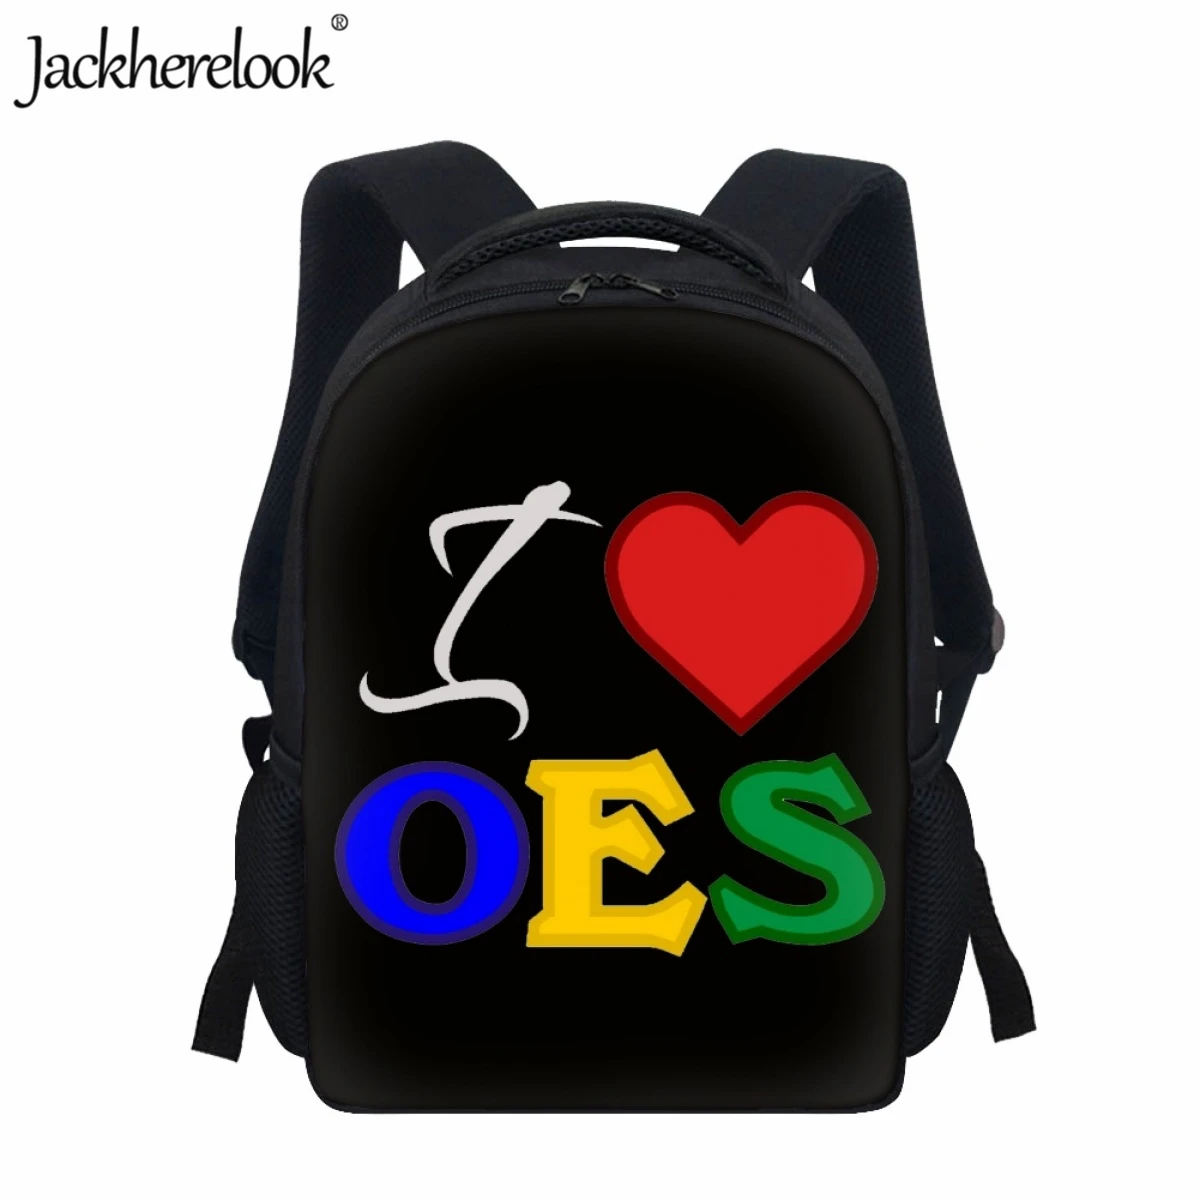 

Jackherelook OES Printing Primary School Bag Fashion New Order of The Eastern Star Book Bags Casual Children's Travel Backpack